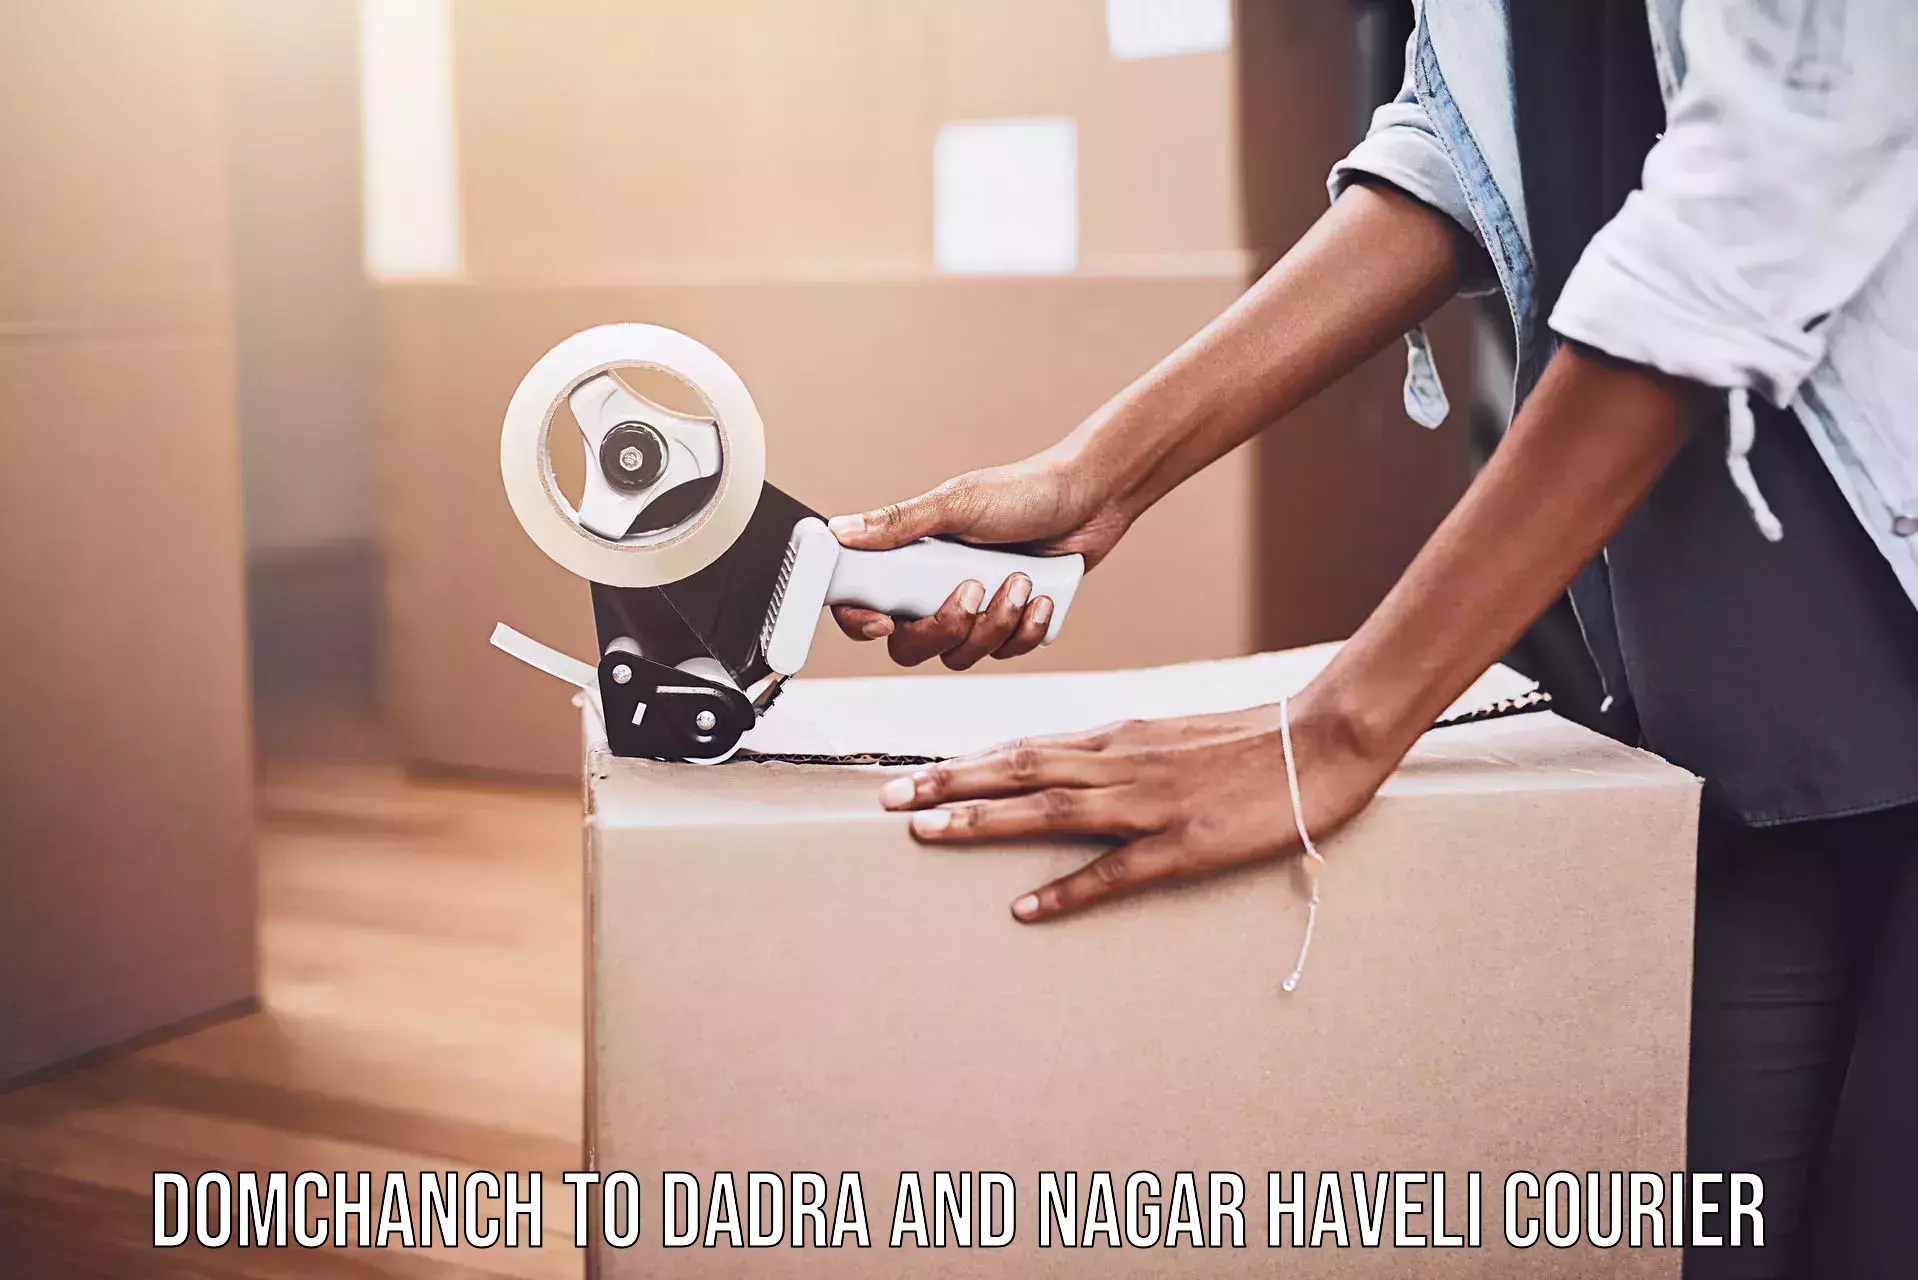 Cash on delivery service Domchanch to Dadra and Nagar Haveli